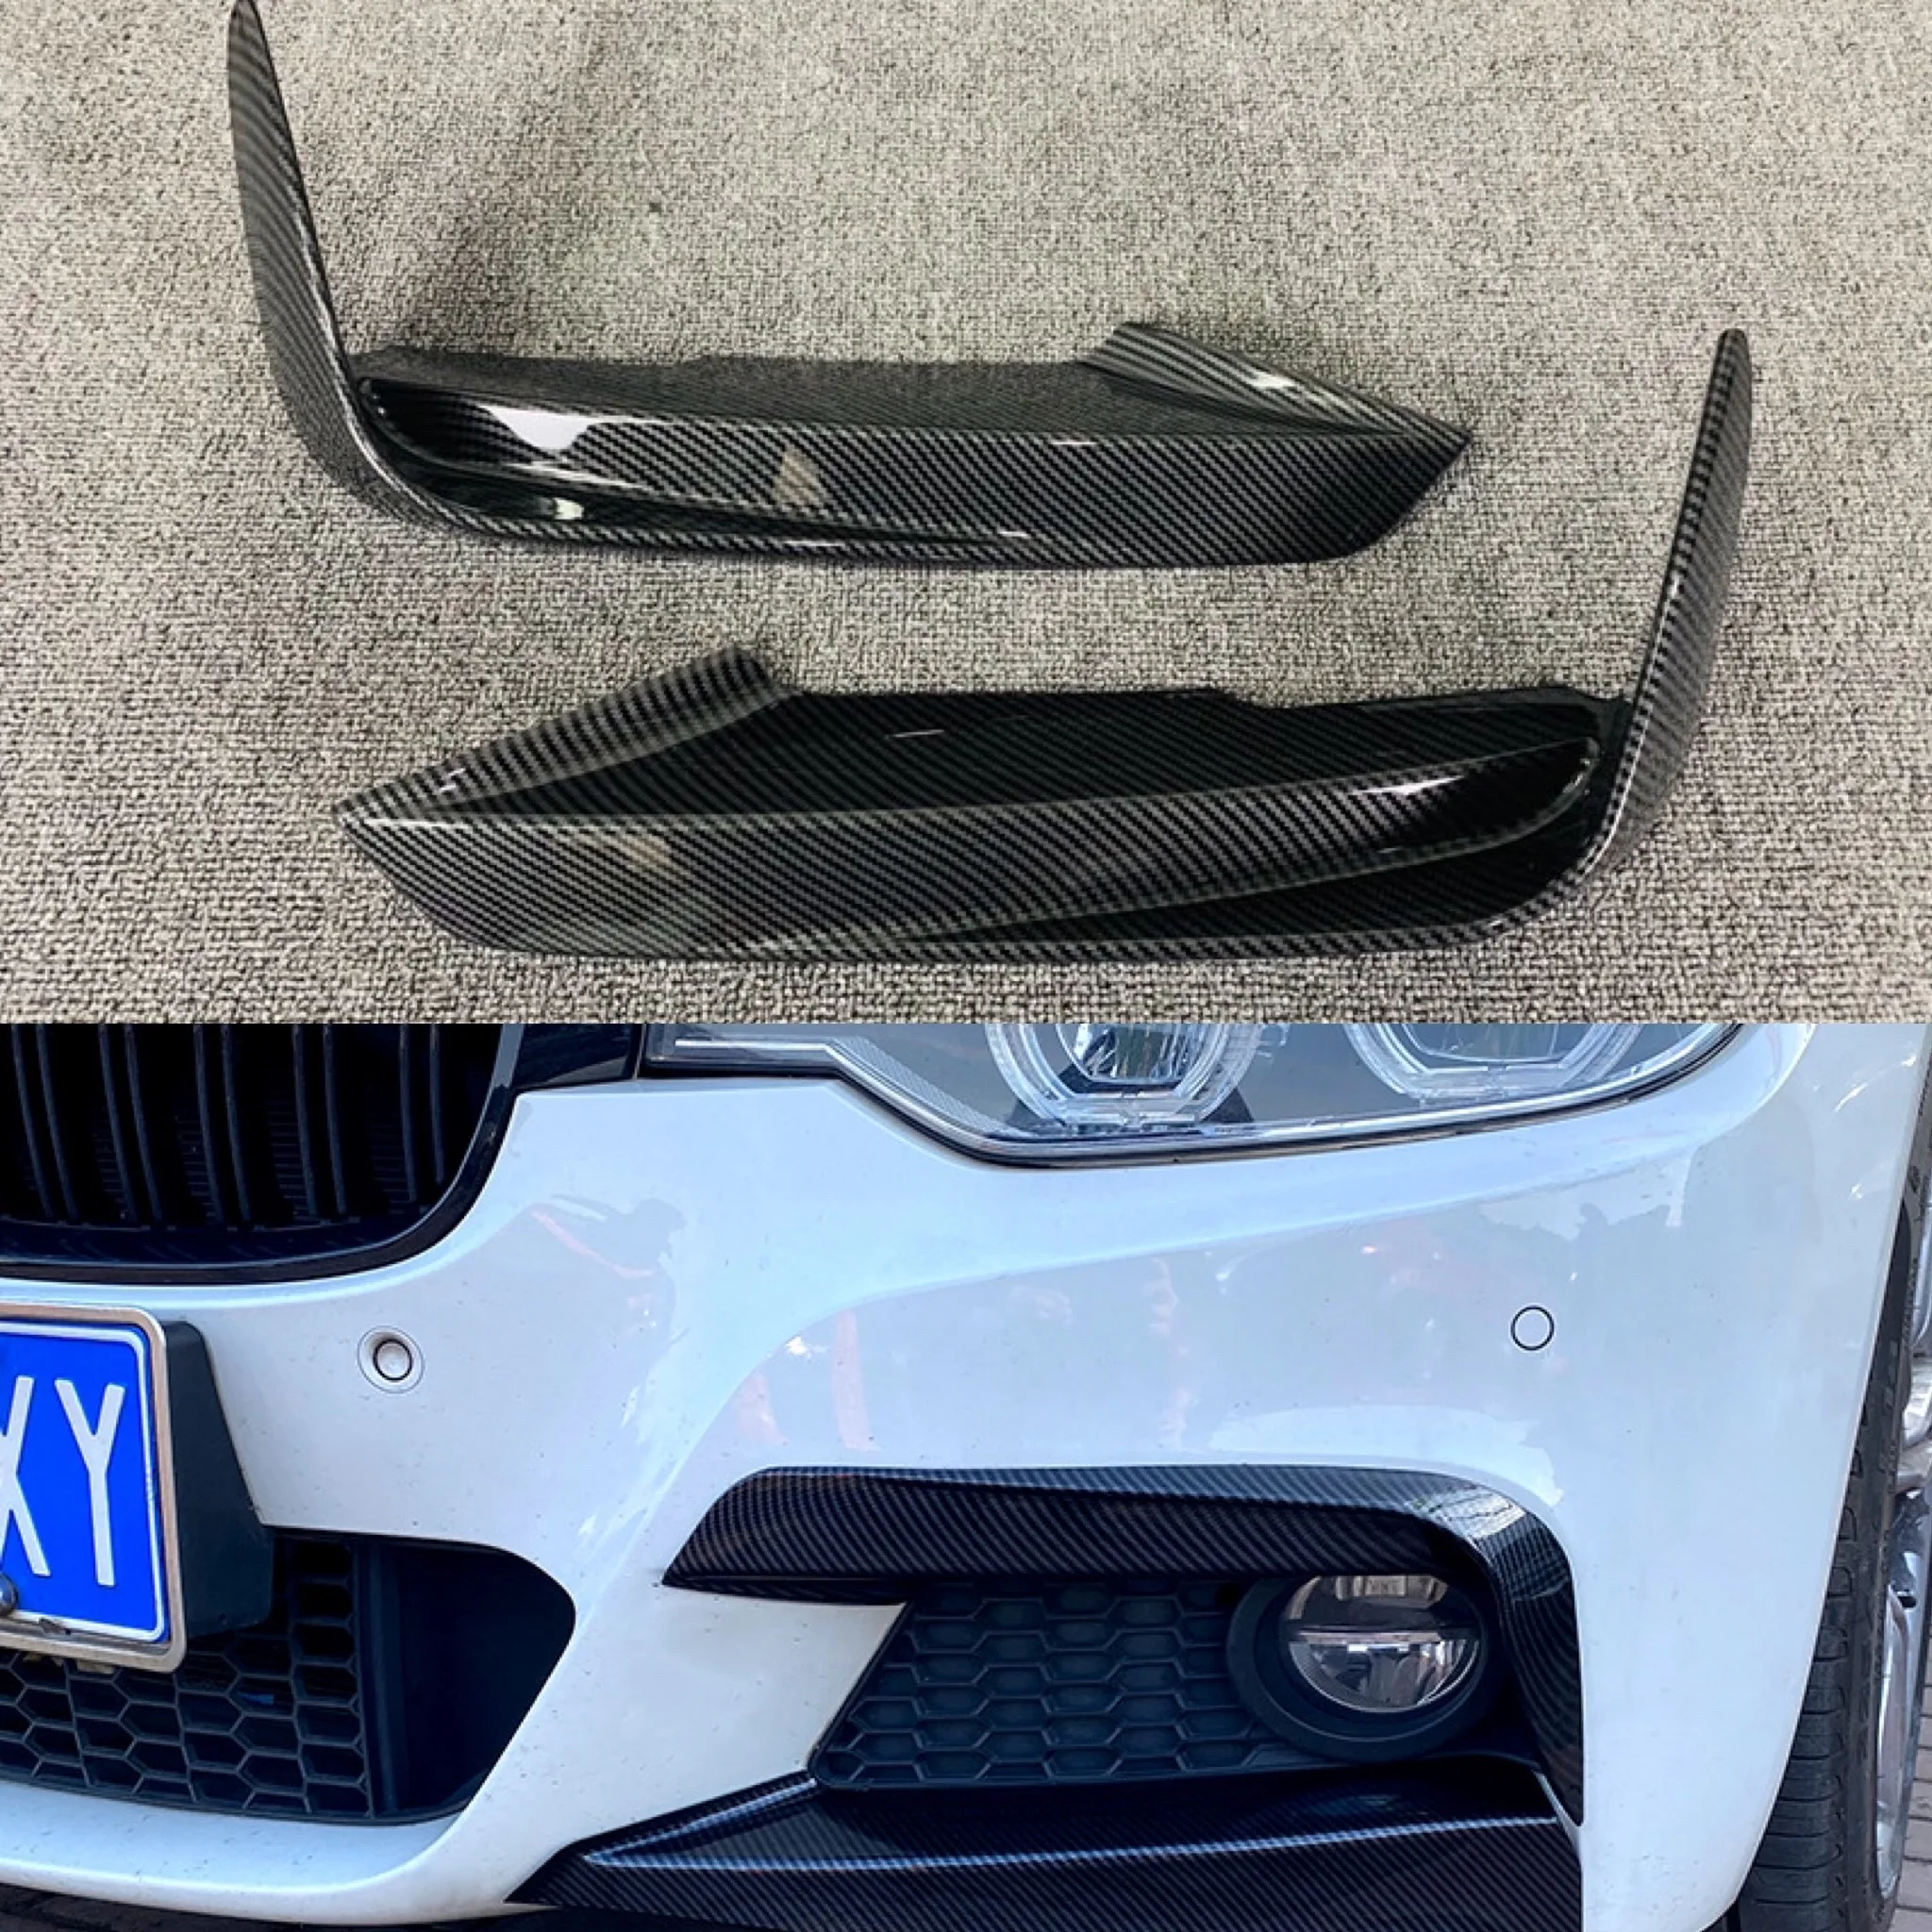 MCBC Tunning ABS Carbon Look Front Bumper Splitter Fog Lamp Fin Front Splitter Fit for BMW 3 Series F30 2013-17 2020111301 